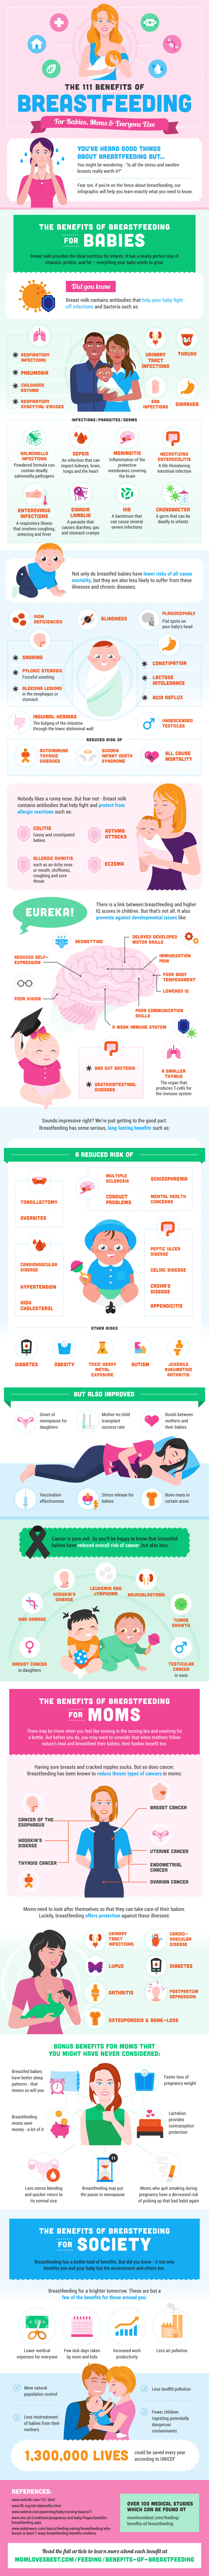 Infographic for The 111 Benefits of Breastfeeding for Babies, Moms & Everyone Else